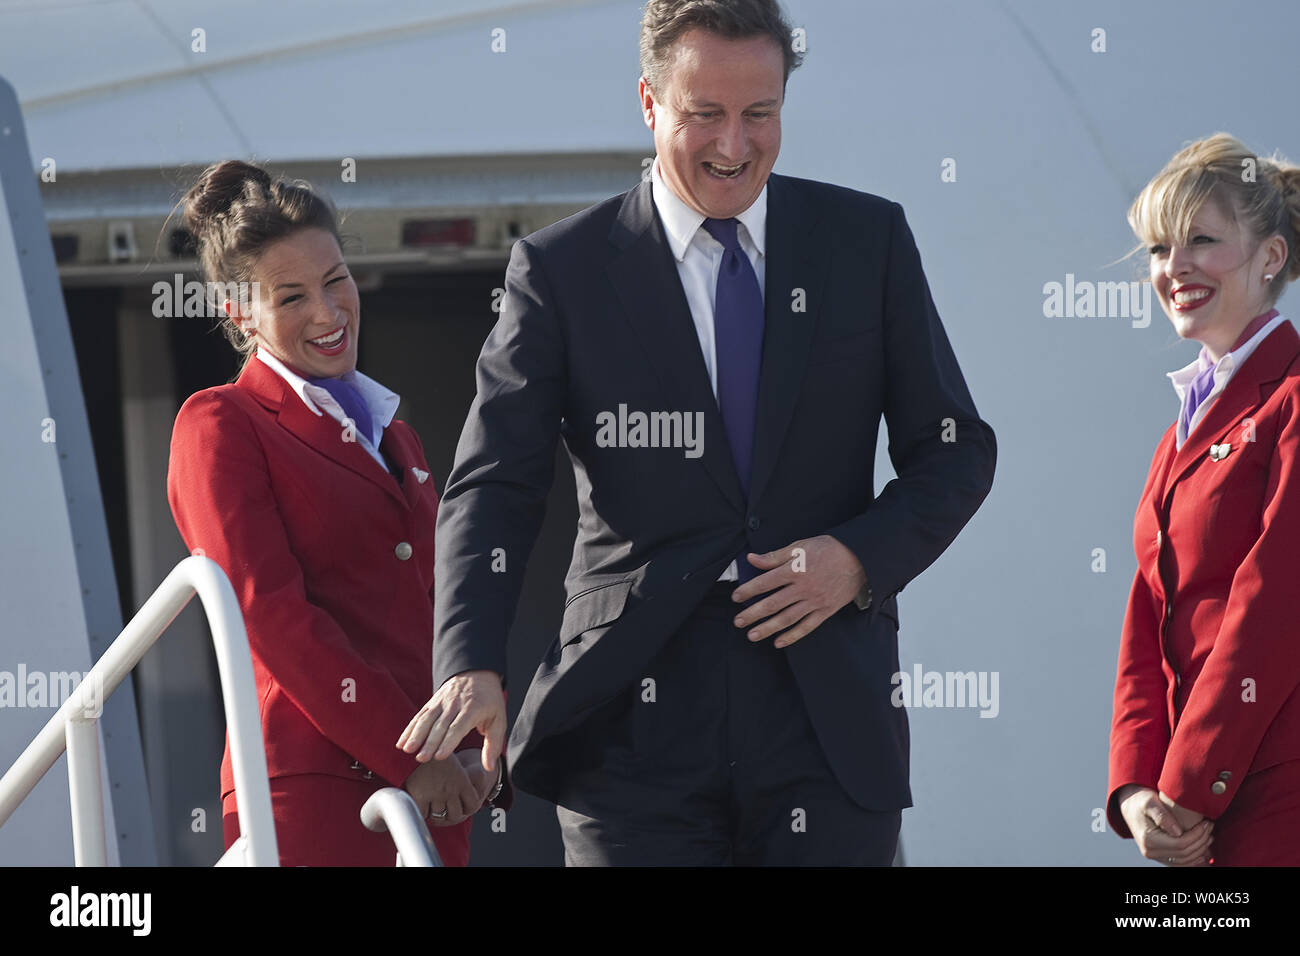 The Prime Minister of Great Briton David Cameron arrives on Virgin Atlantic Airlines at Toronto International Airport, June 24, 2010 to attend the G8, G20 Summits in Huntsville and Toronto, Ontario, Canada.   UPI/Heinz Ruckemann. Stock Photo